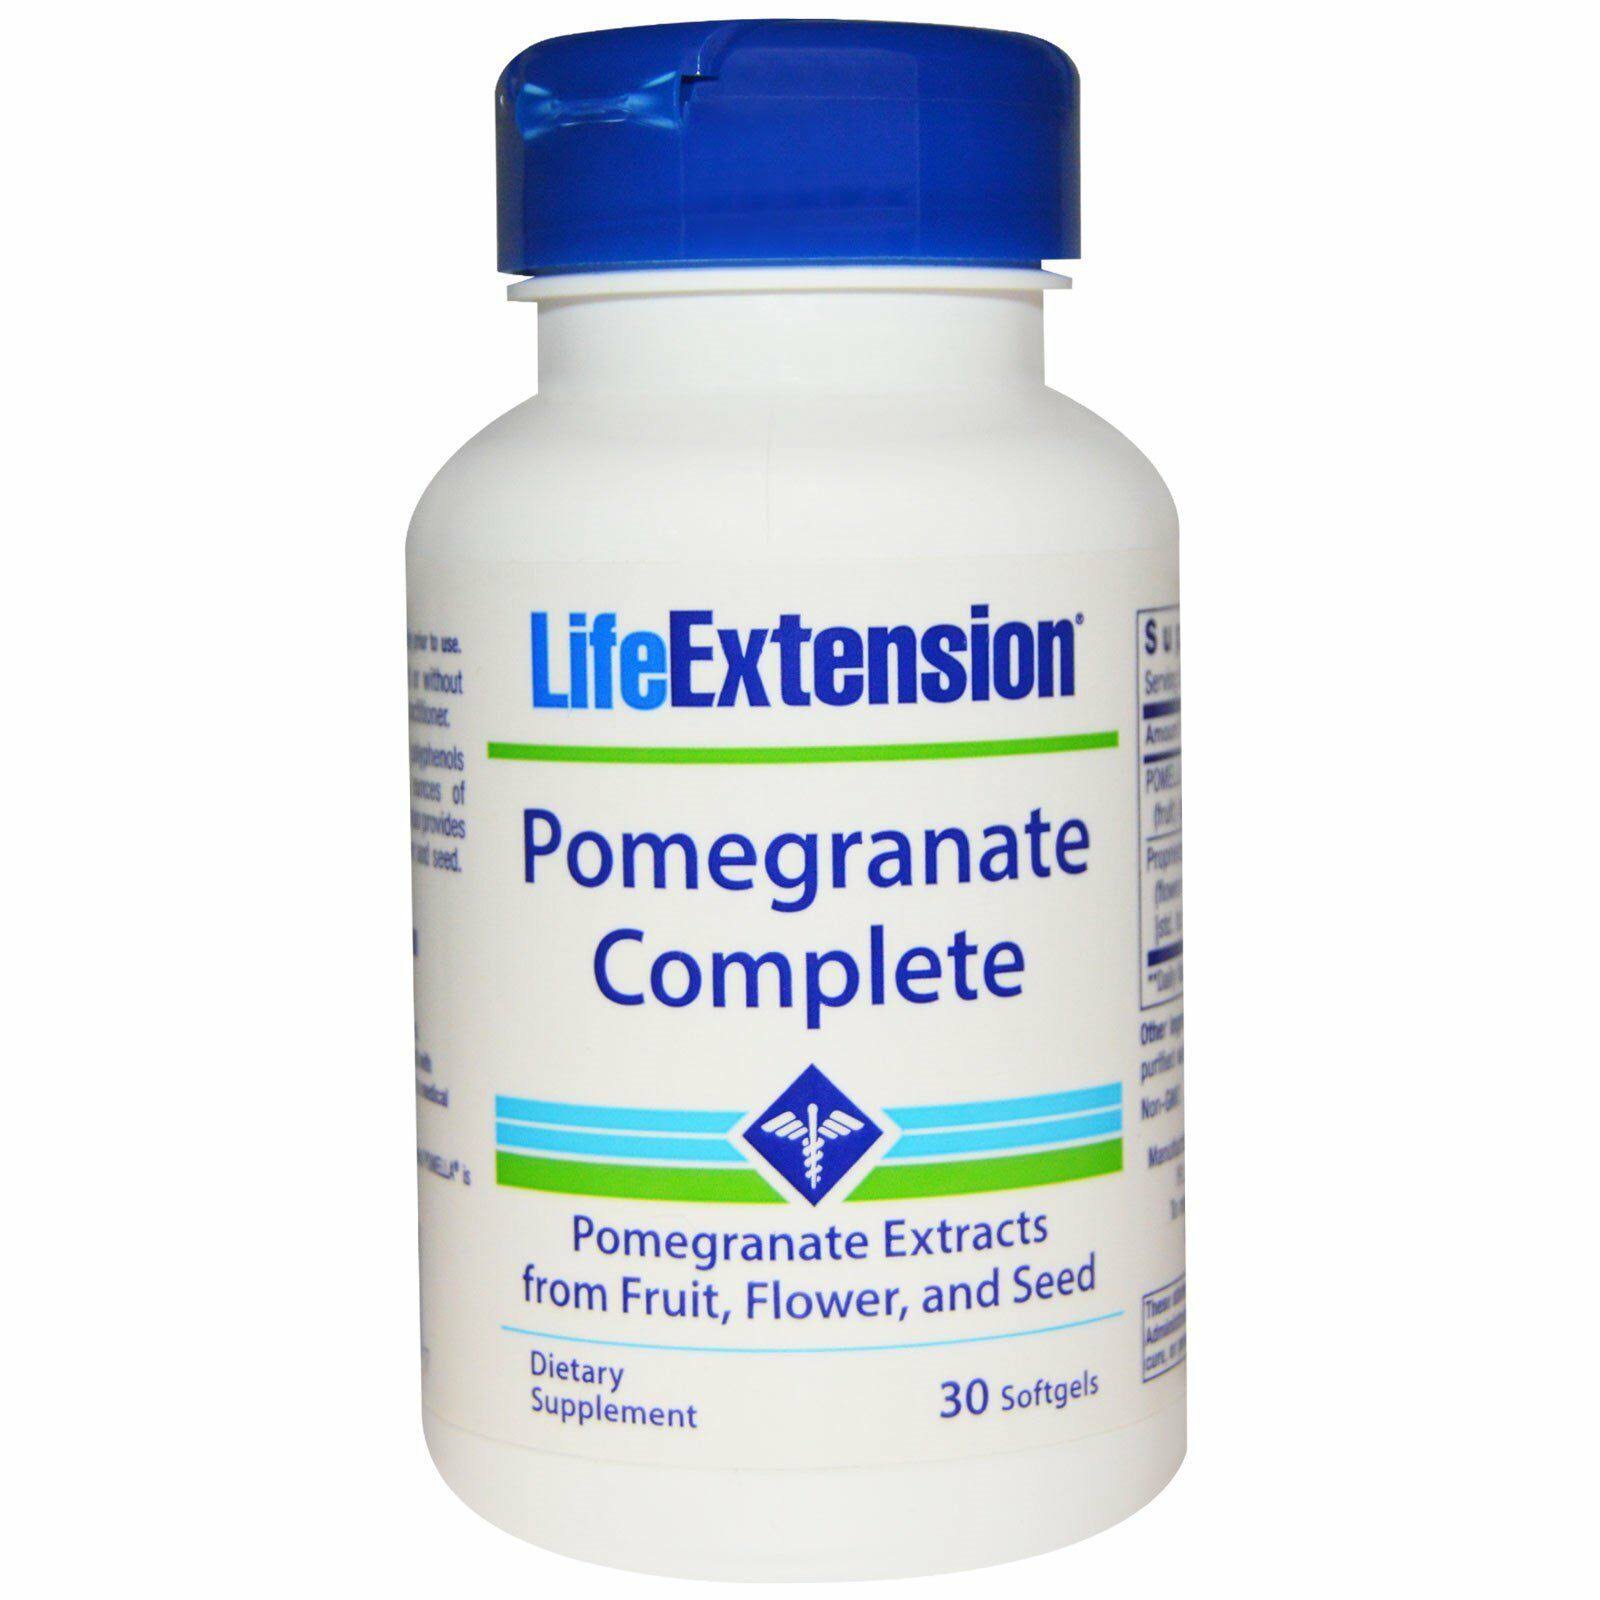 Life Extension Pomegranate Complete Supplement - 30 Softgels